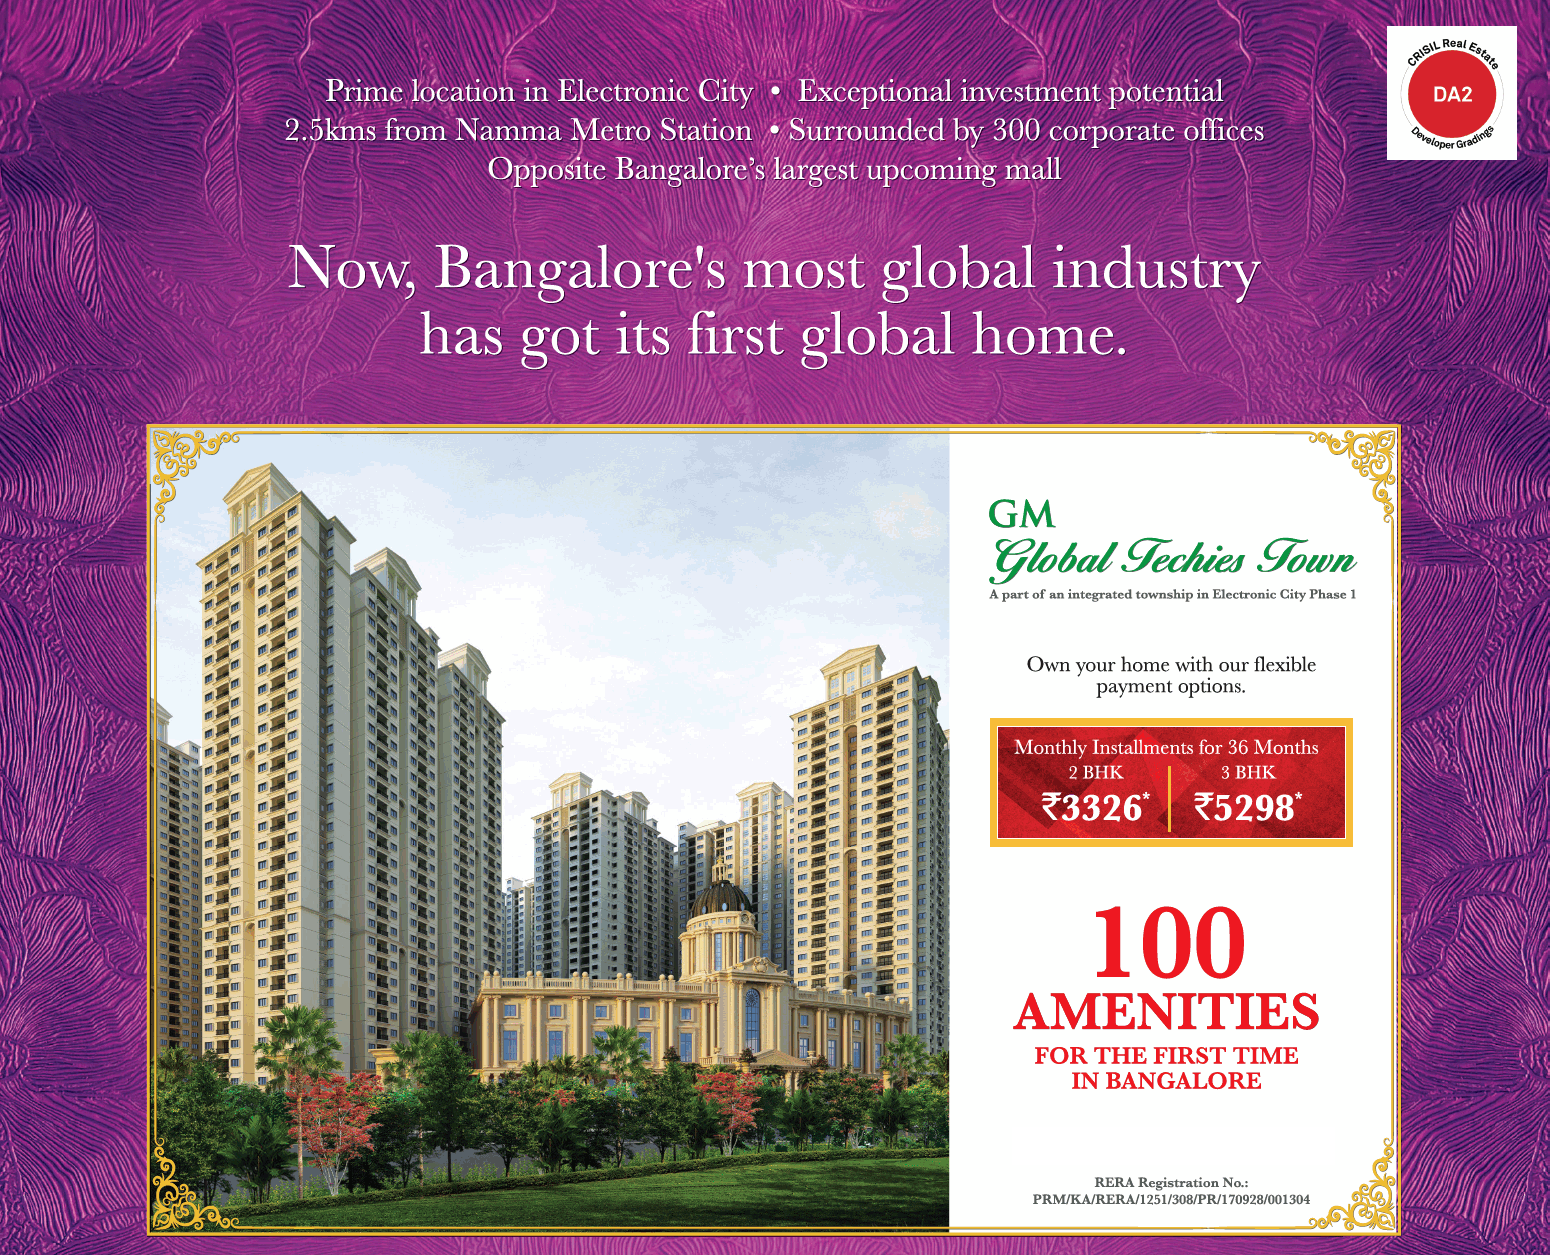 Avail 100 amenities for the first time at Global Techies Town in Bangalore Update